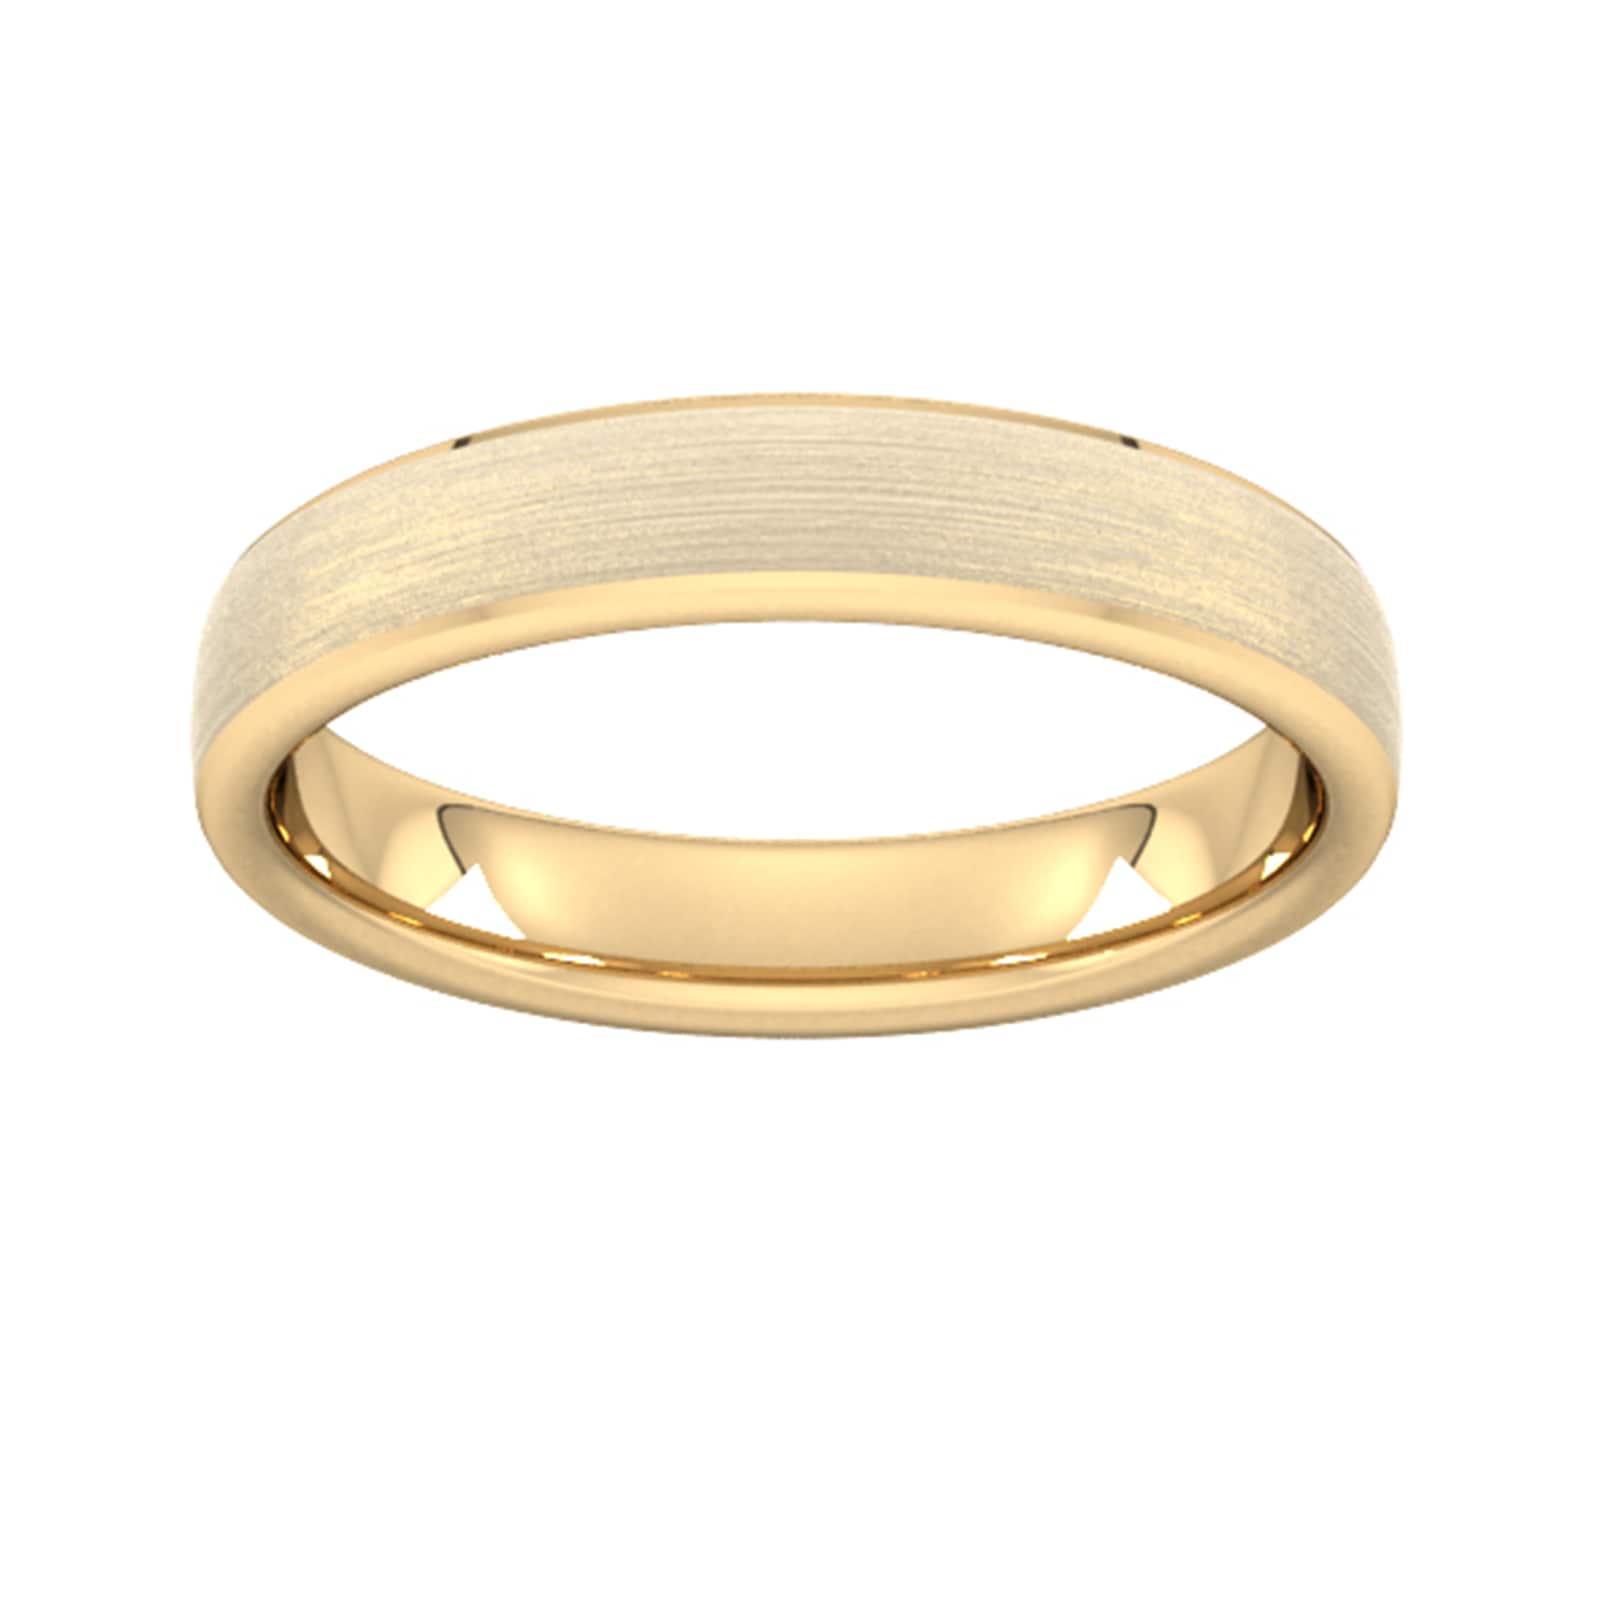 4mm D Shape Standard Polished Chamfered Edges With Matt Centre Wedding Ring In 18 Carat Yellow Gold - Ring Size M